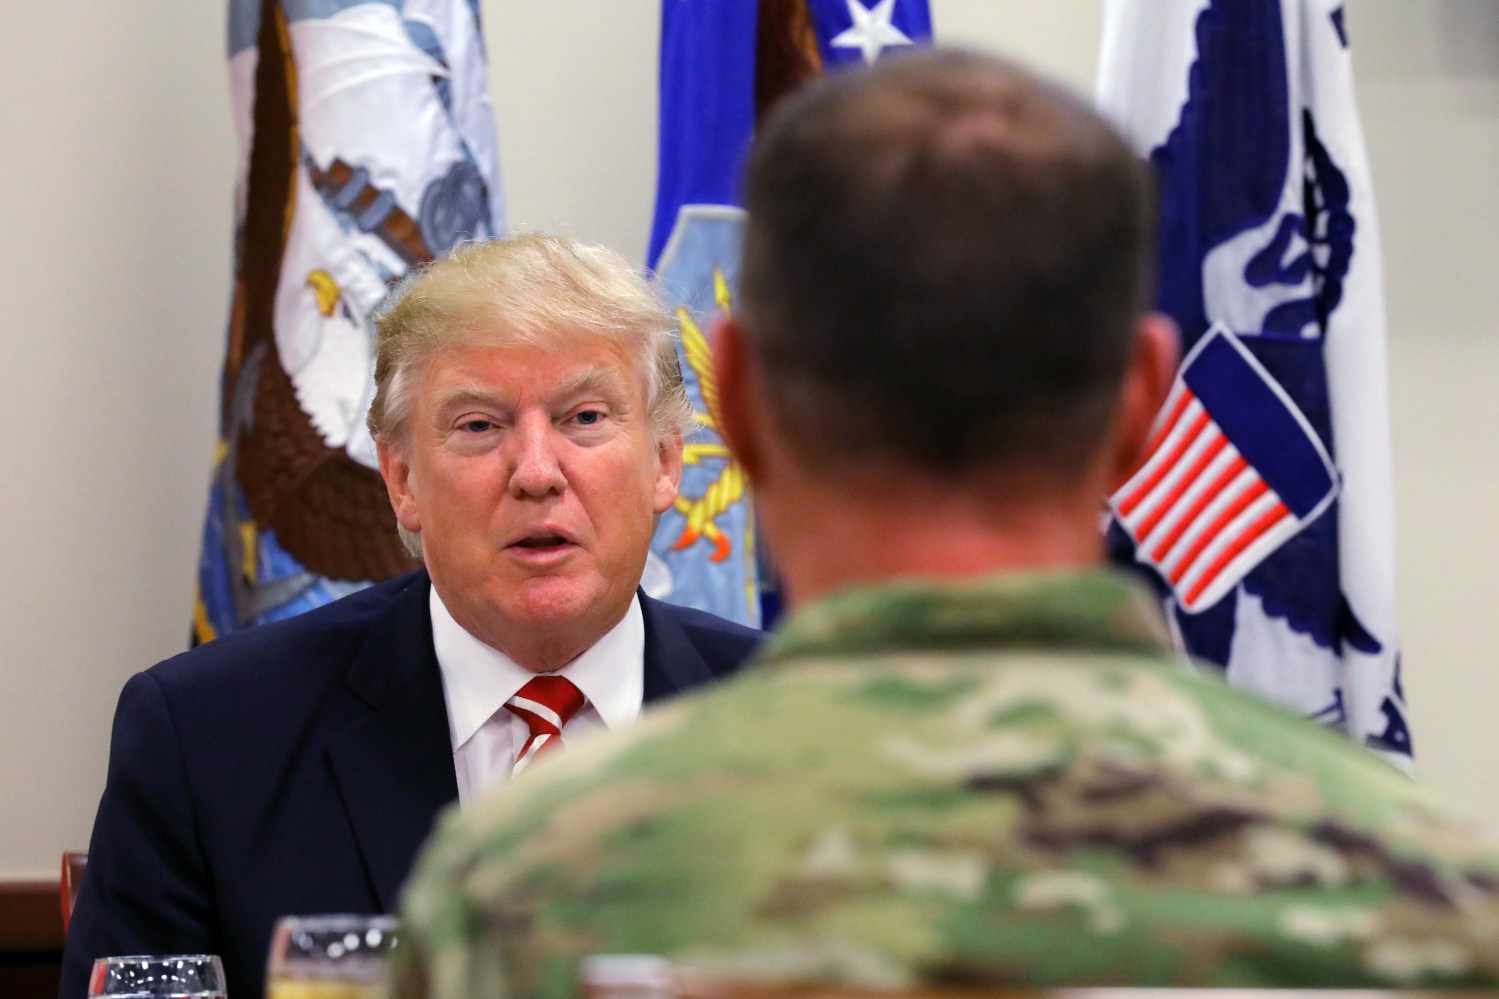 U.S. President Donald Trump attends a lunch with members of the U.S. military during a visit at the U.S. Central Command (CENTCOM) and Special Operations Command (SOCOM) headquarters in Tampa, Florida, U.S., February 6, 2017. REUTERS/Carlos Barria - RTX2ZW4Z